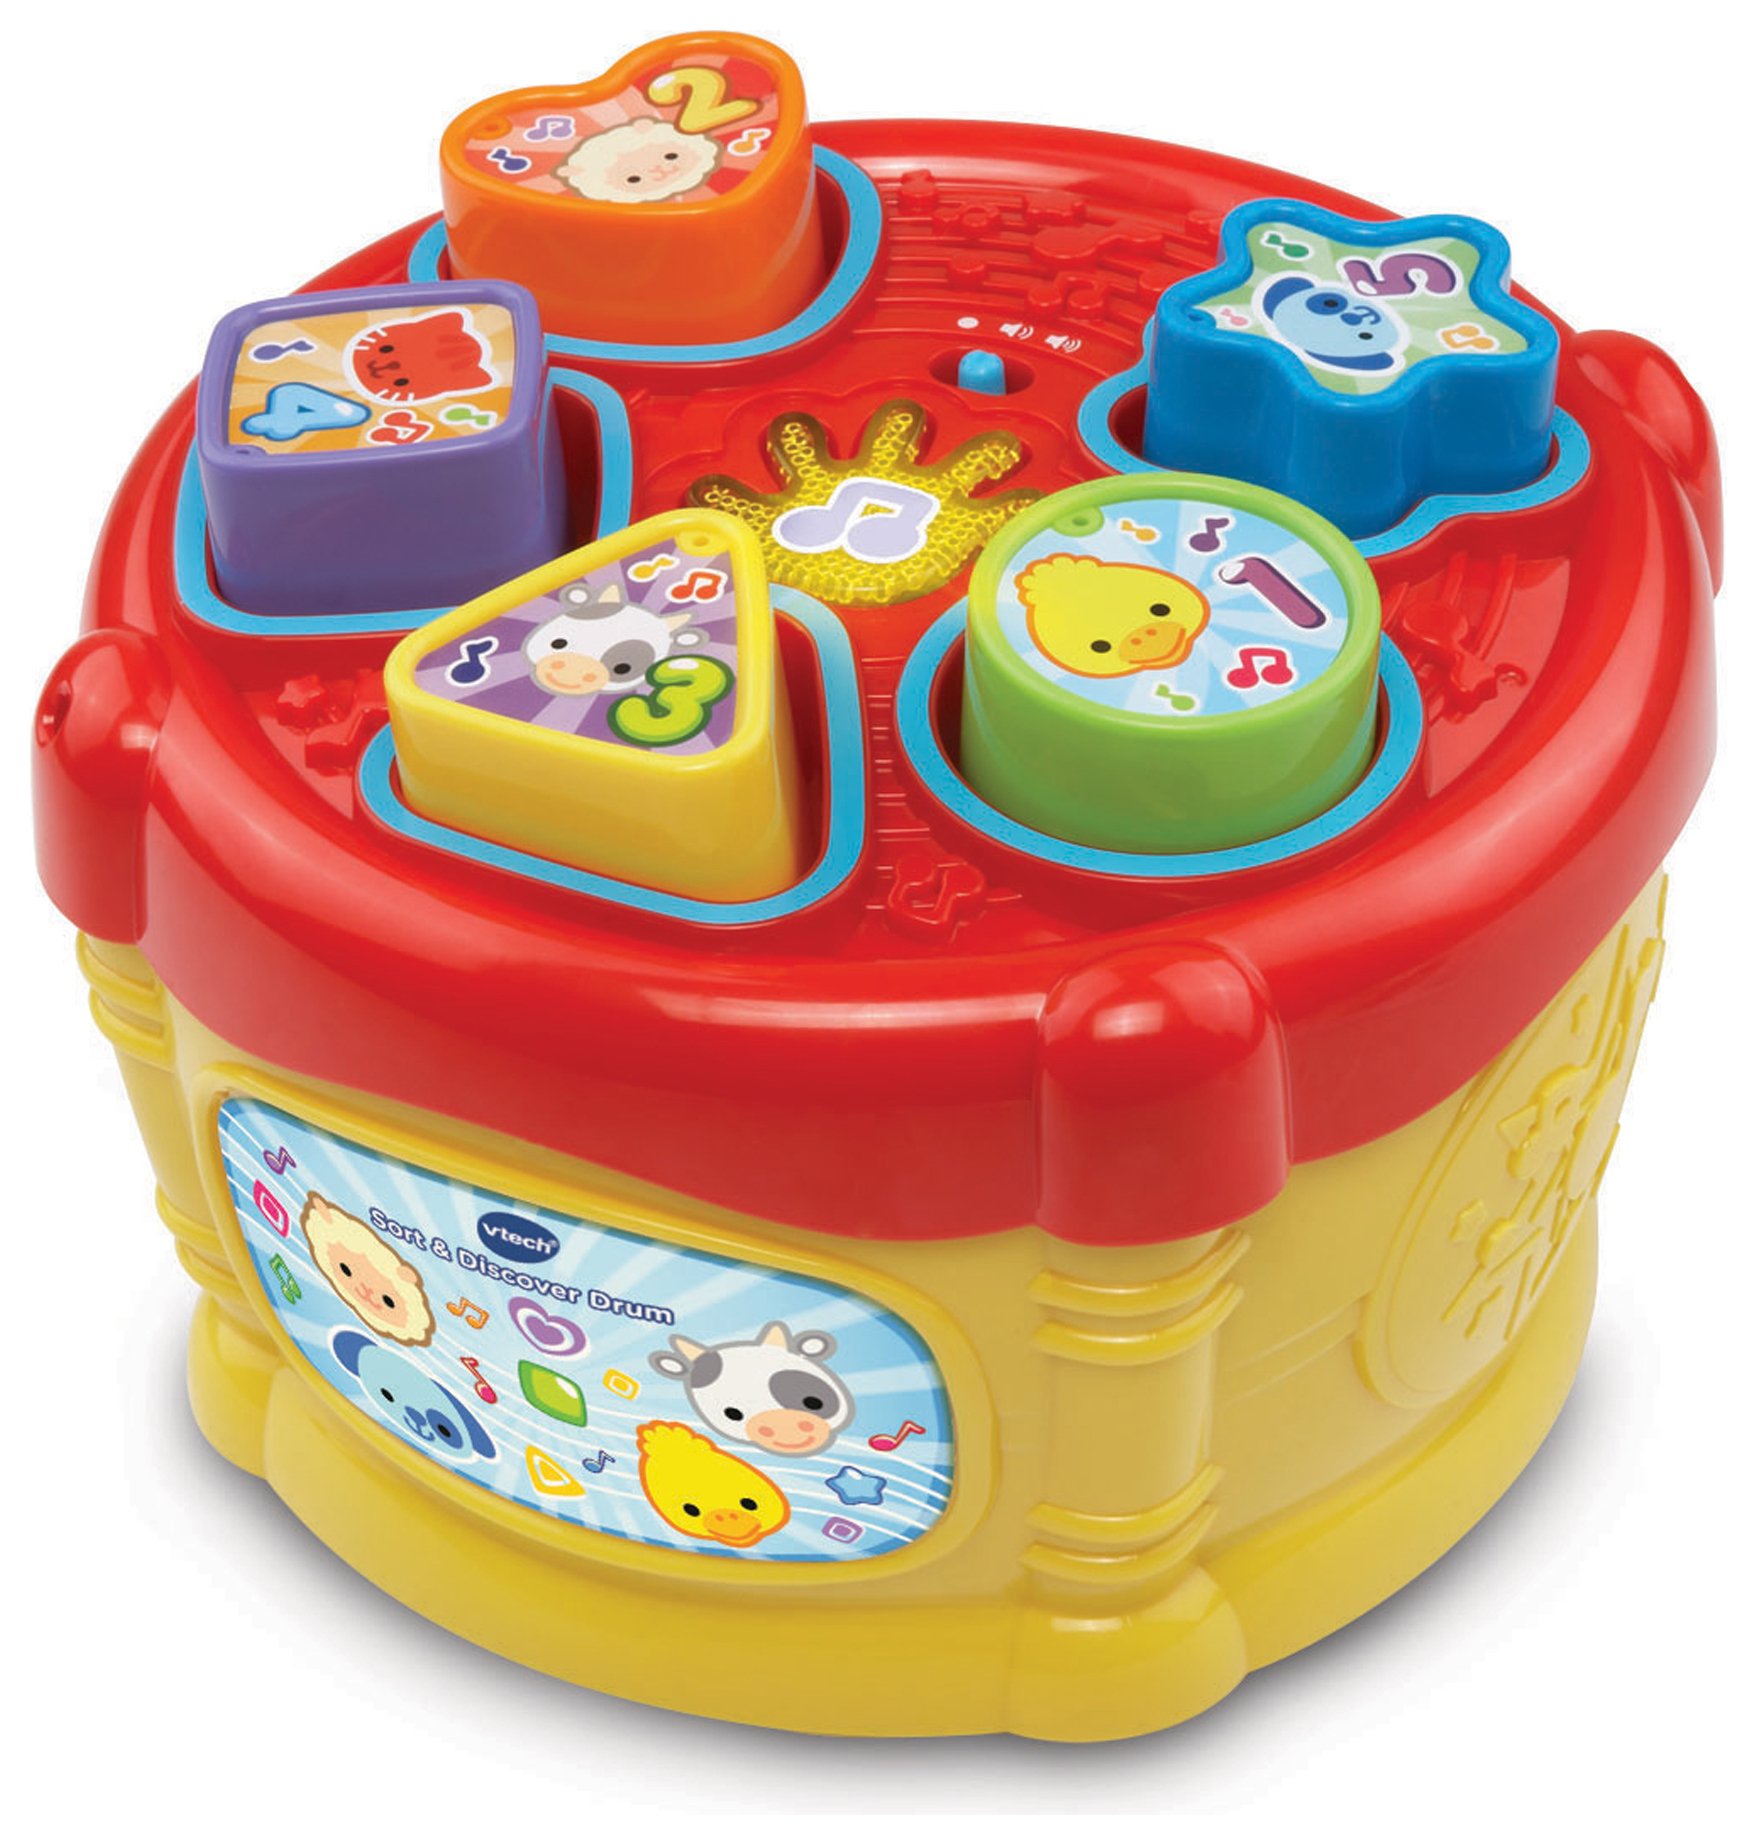 VTech Sort and Discover Drum Activity Toy